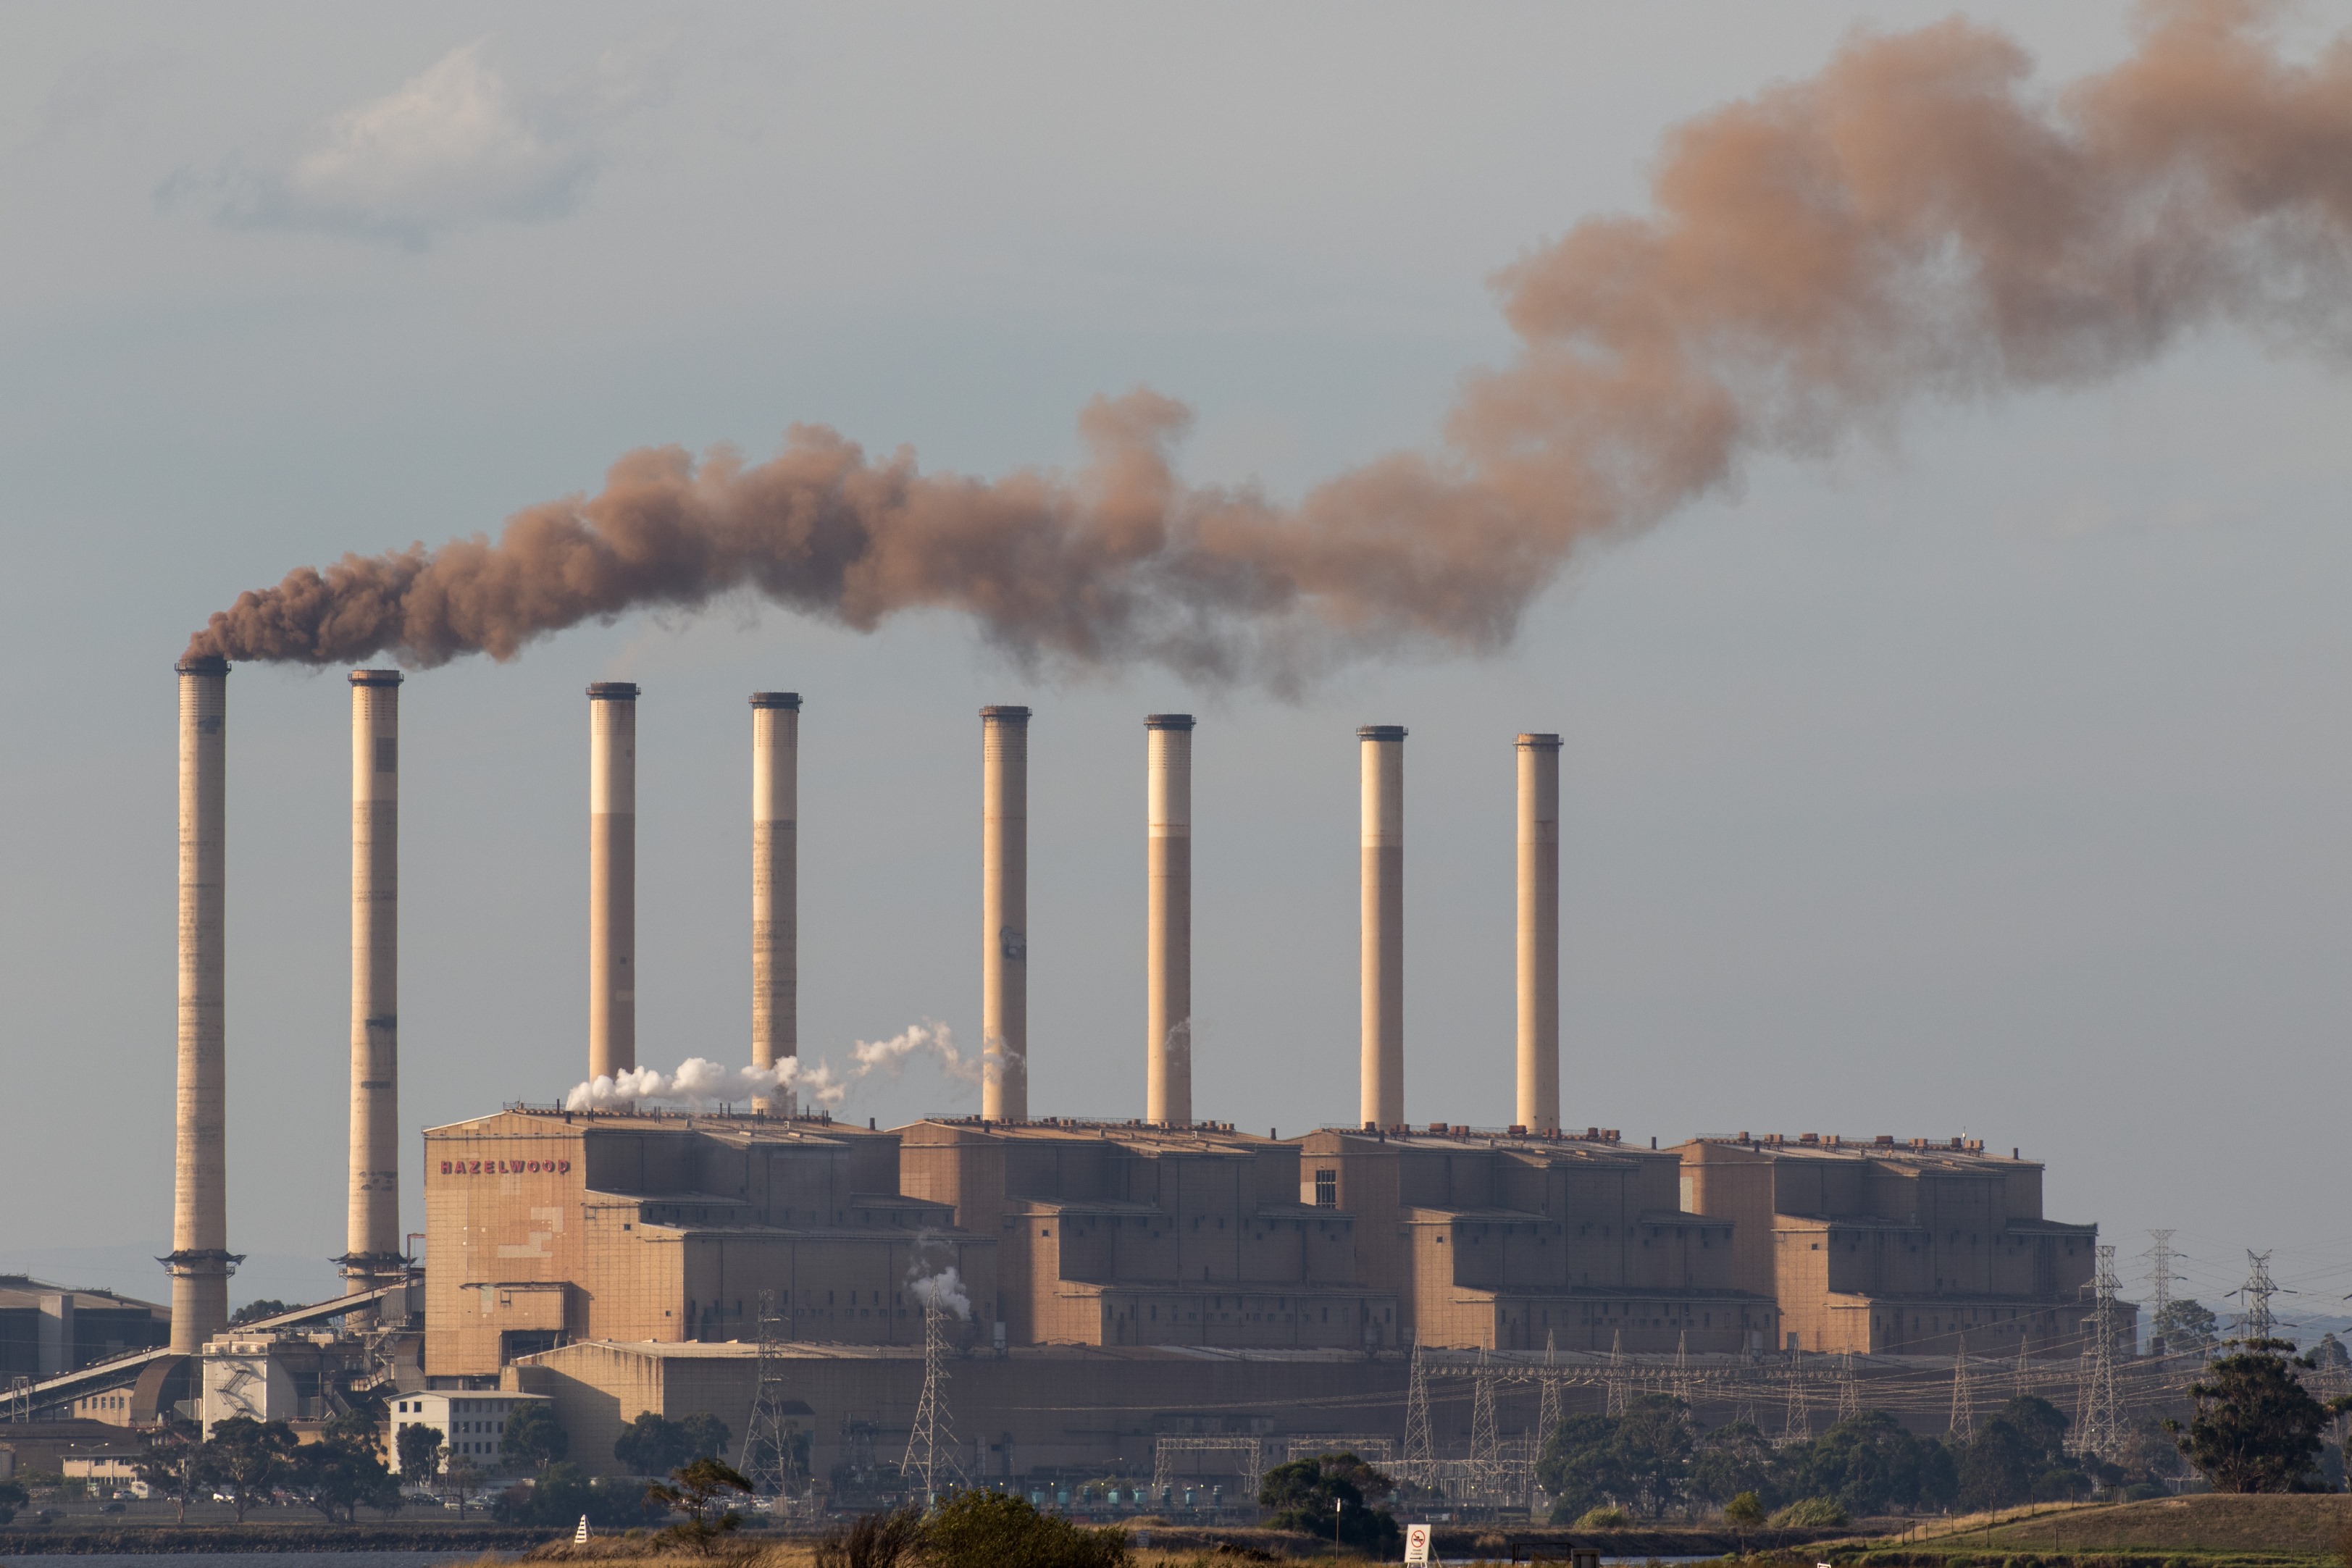 Photograph of the Hazelwood power station, La Trobe valley, Victoria. ​Image by 'Mira' on Wikipedia CC BY-SA 4.0.